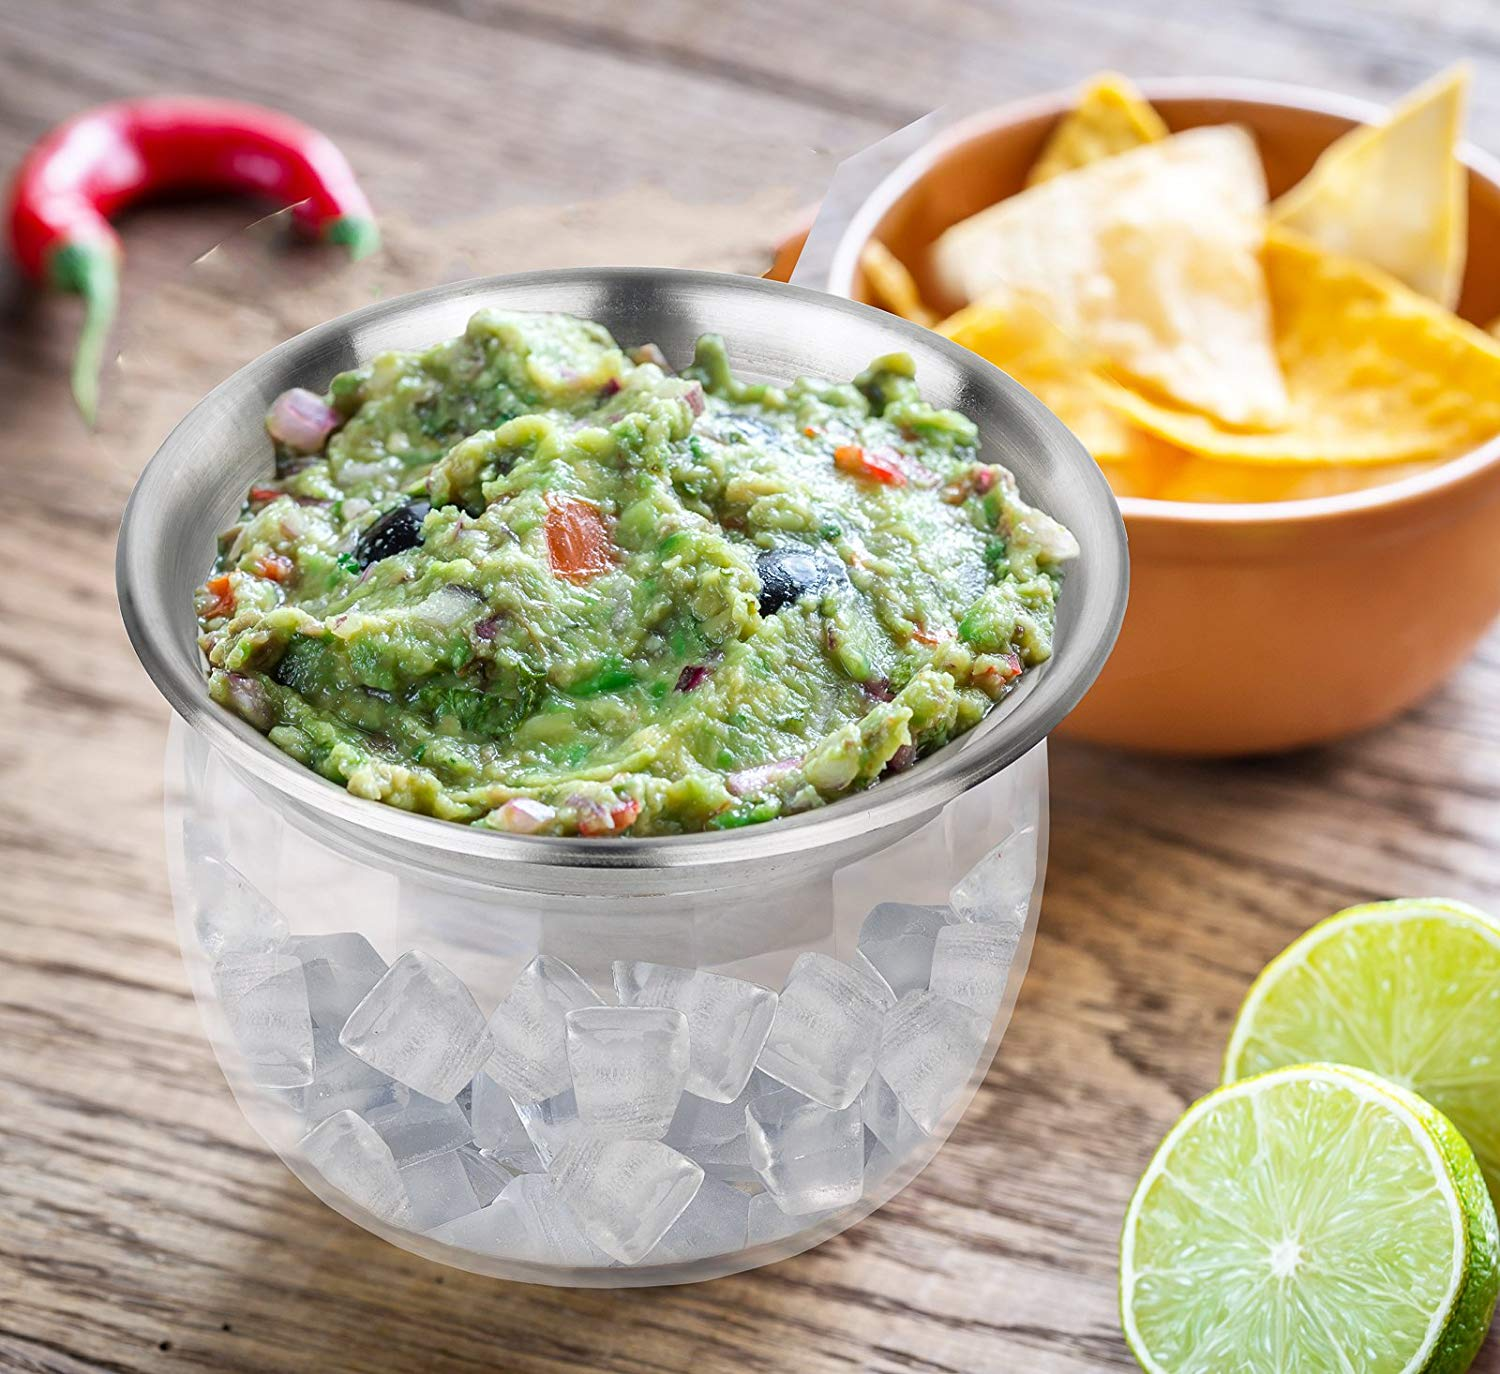 For many, football means food.<br><br>Entertain the guests coming over for your sick TV with a nifty guac holder available <a href="https://amzn.to/2nHqGYs" "nofollow" target="_blank">here</a>.